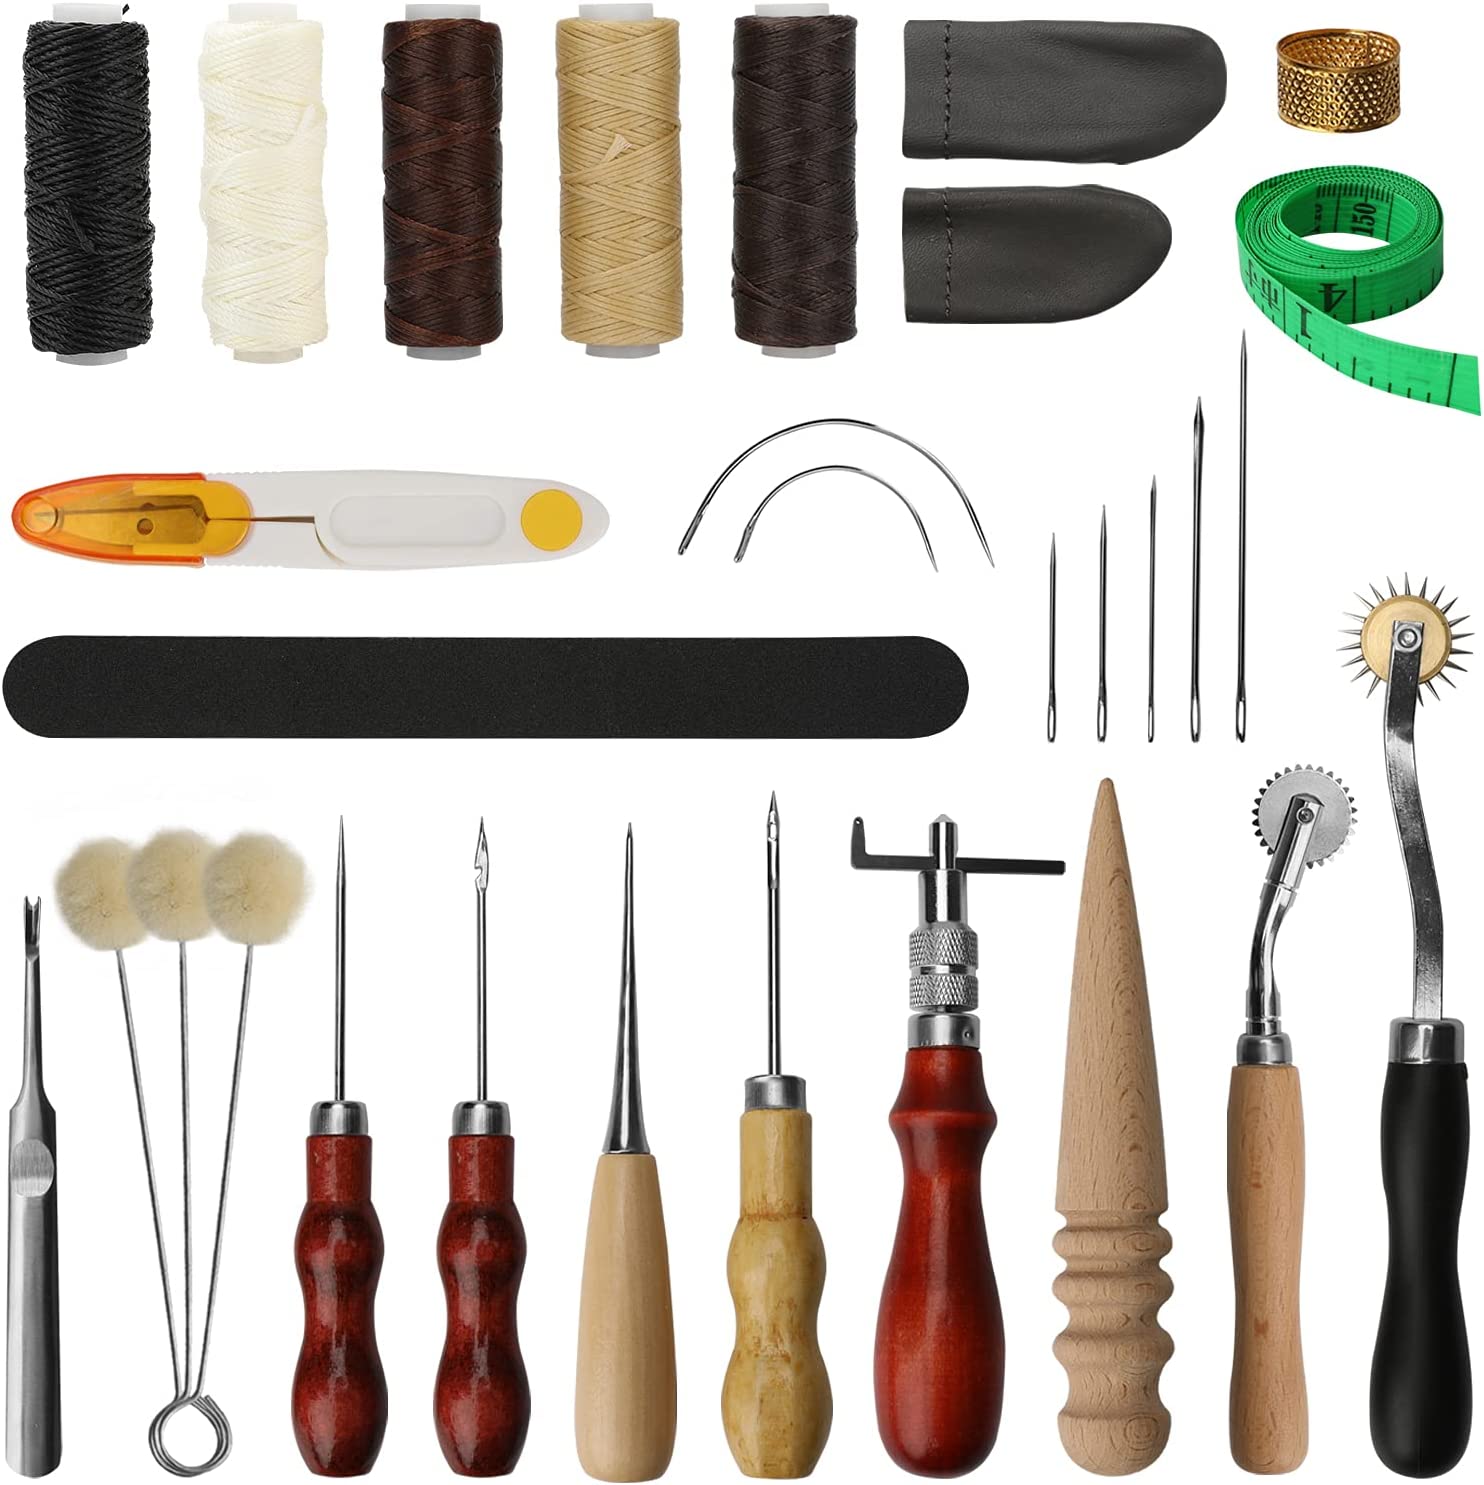 Leather Tool Kit Ideashop 30 PCS Leather Working Tools with Leather Groover  Awl Waxed Thread Kit and Other Leather Tools for Stitching Trimming Cutting  Sewing Leather Craft Making